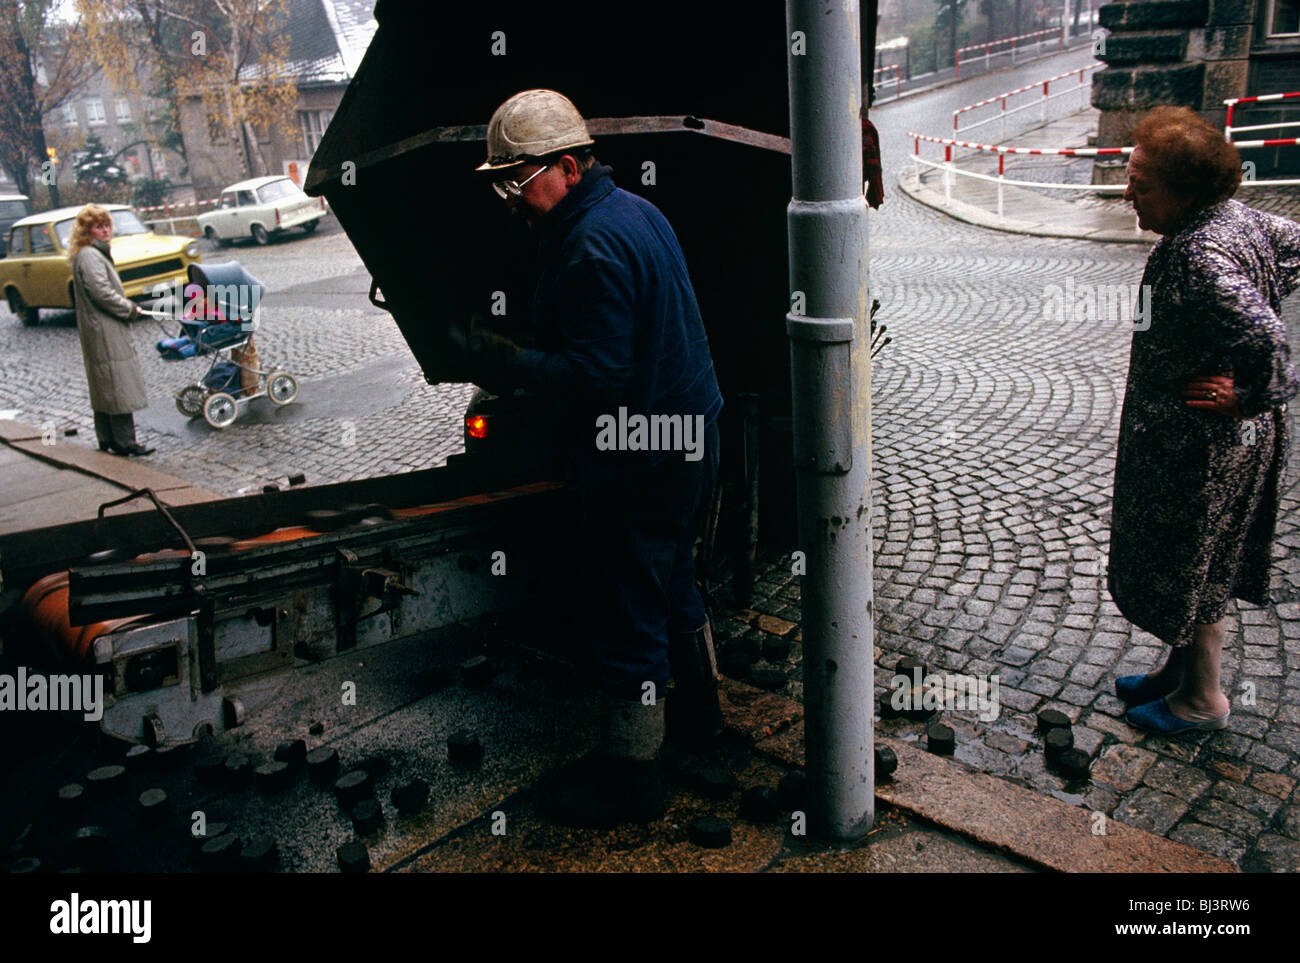 A coal delivery man deposits chunks of brown coal into the cellar via a conveyor belt for an elderly lady who stands outside. Stock Photo